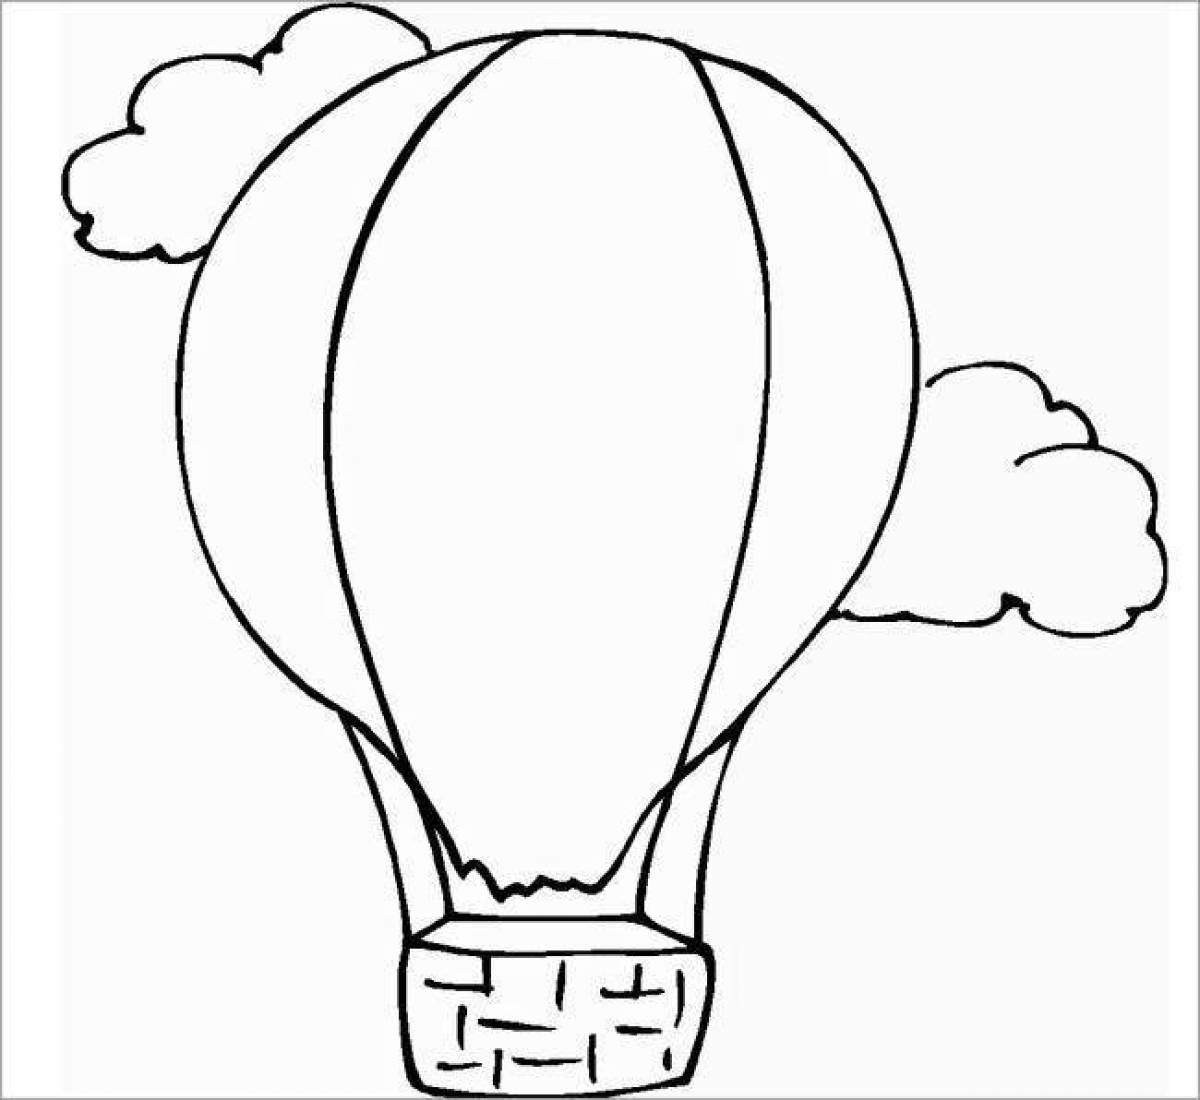 Coloring book glowing balloon with a basket